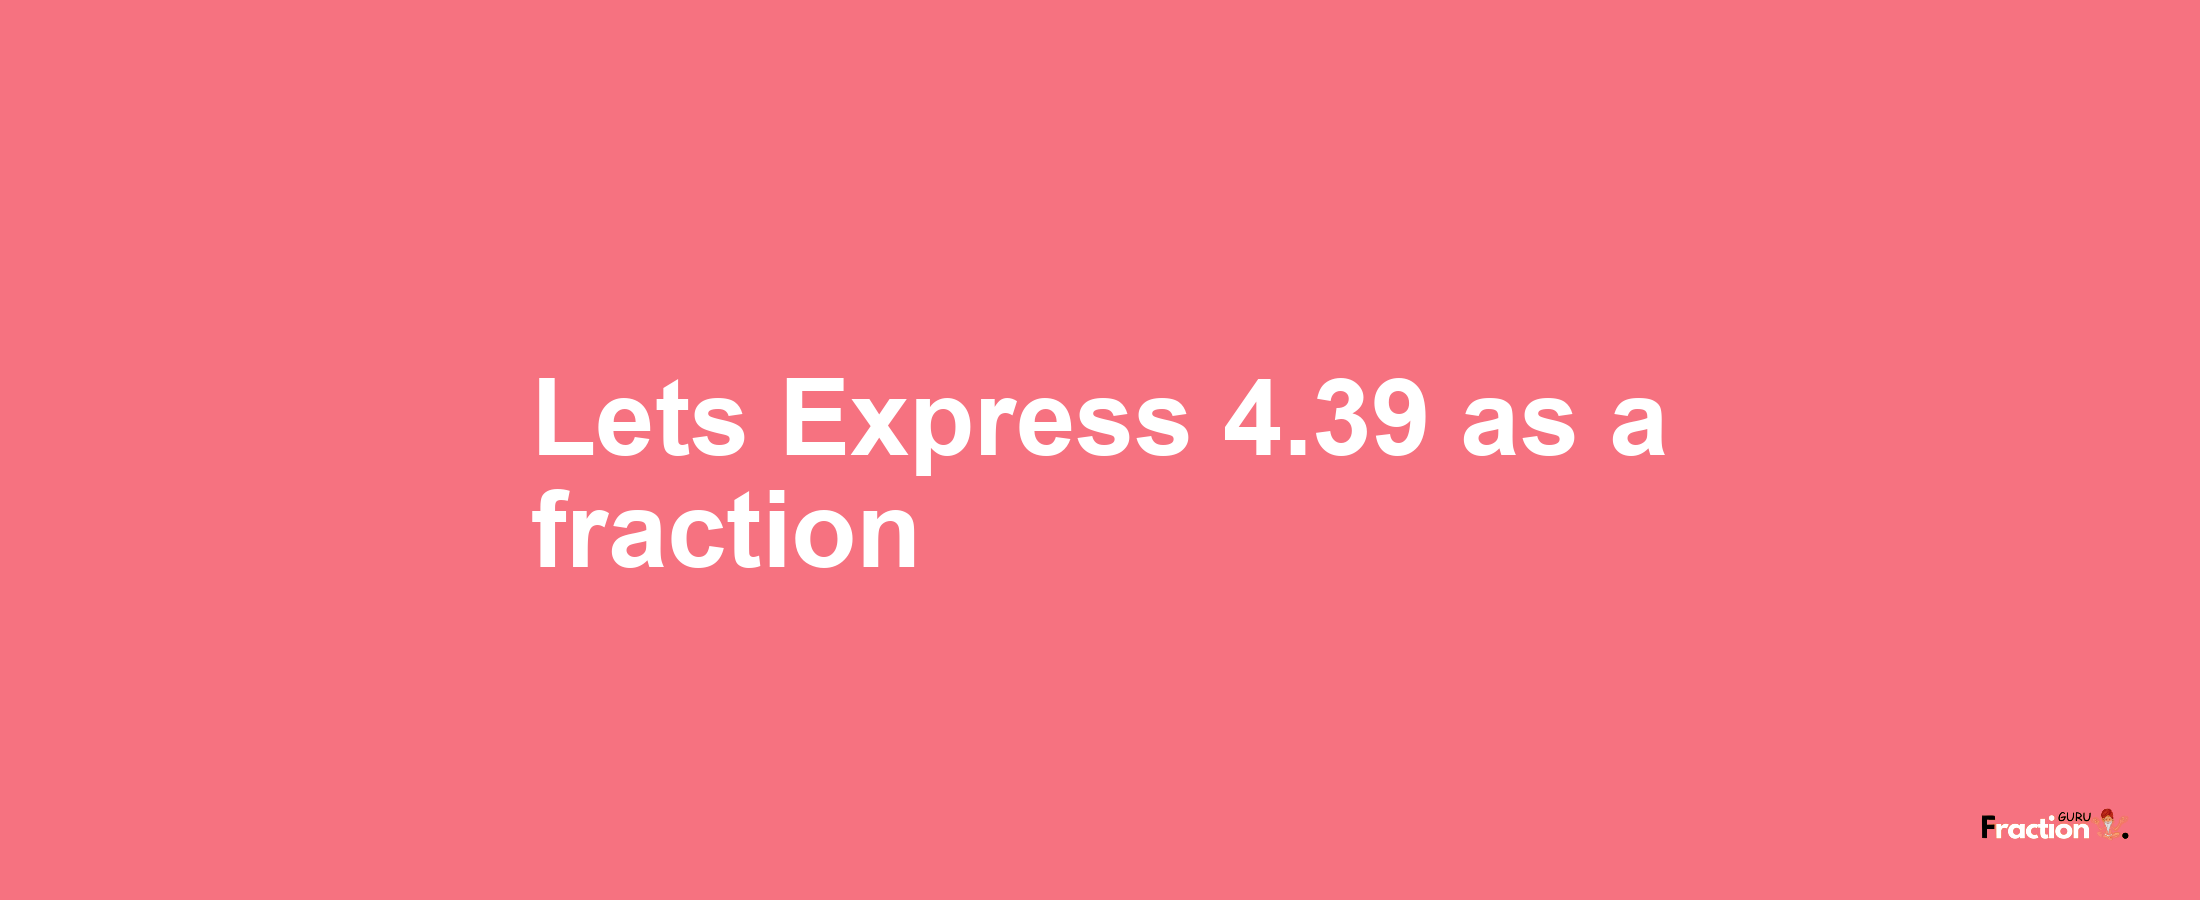 Lets Express 4.39 as afraction